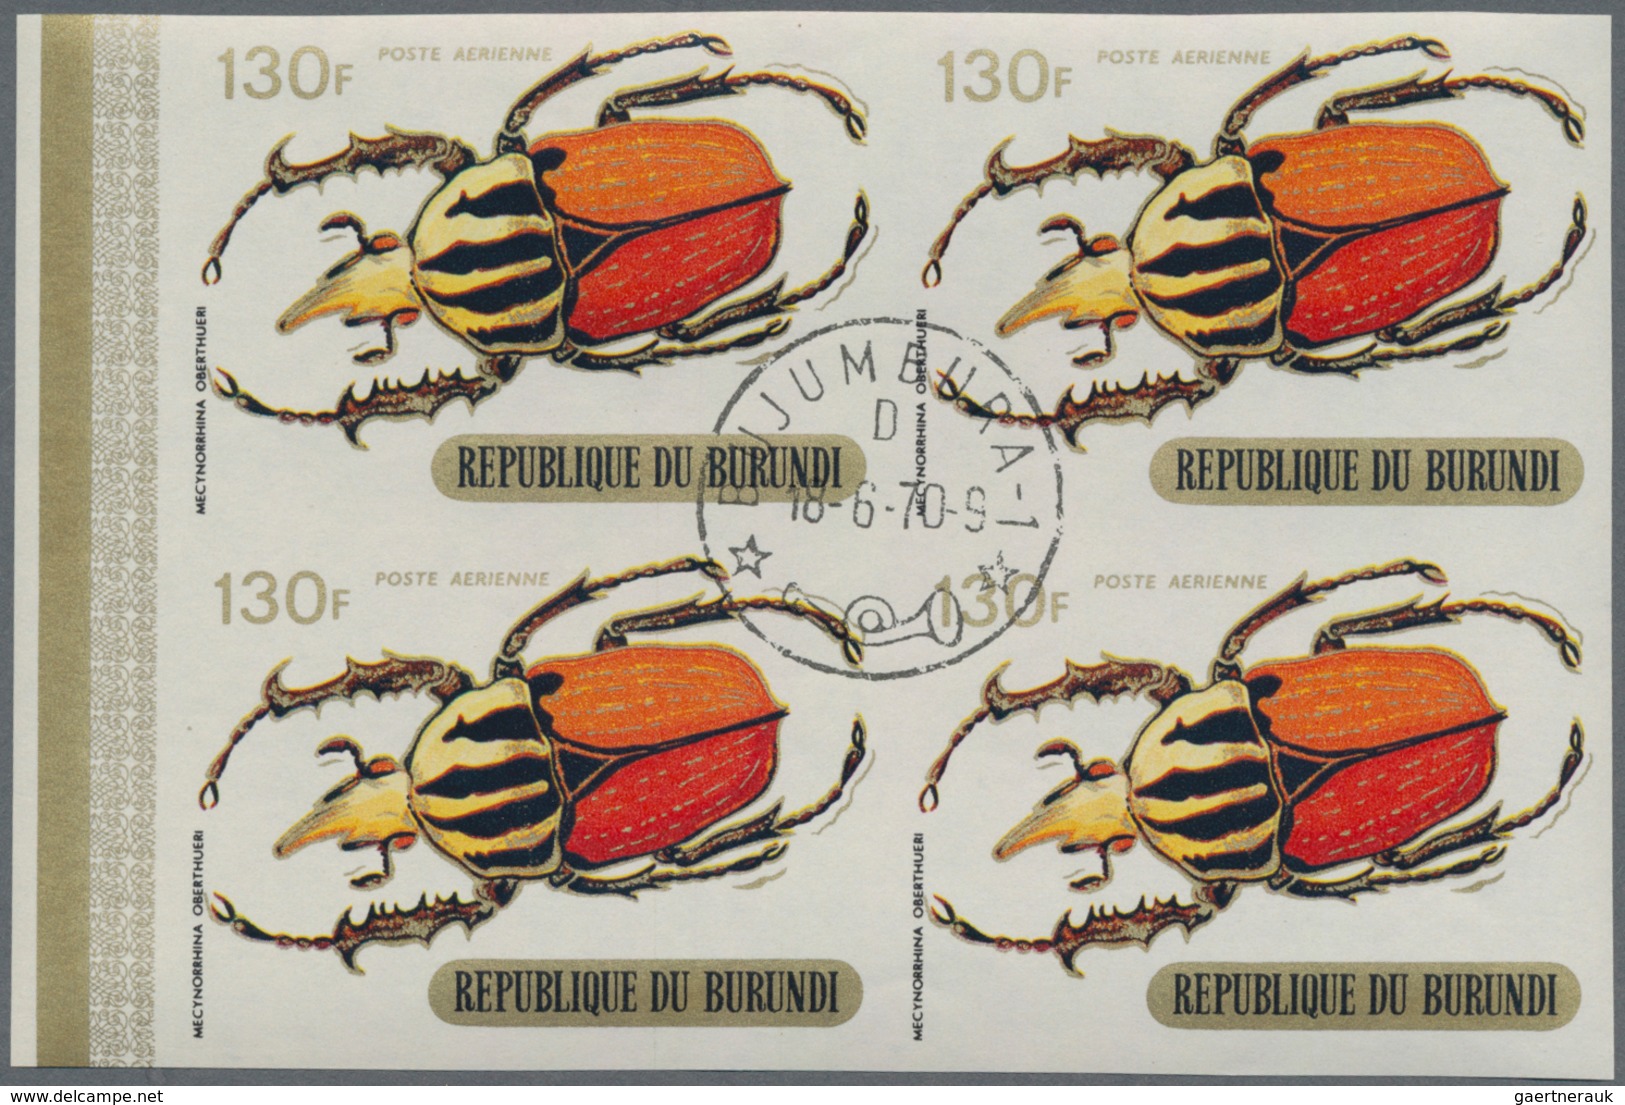 Burundi: 1965/1980 (ca.), duplicated accumulation in large box with mostly IMPERFORATE single stamps